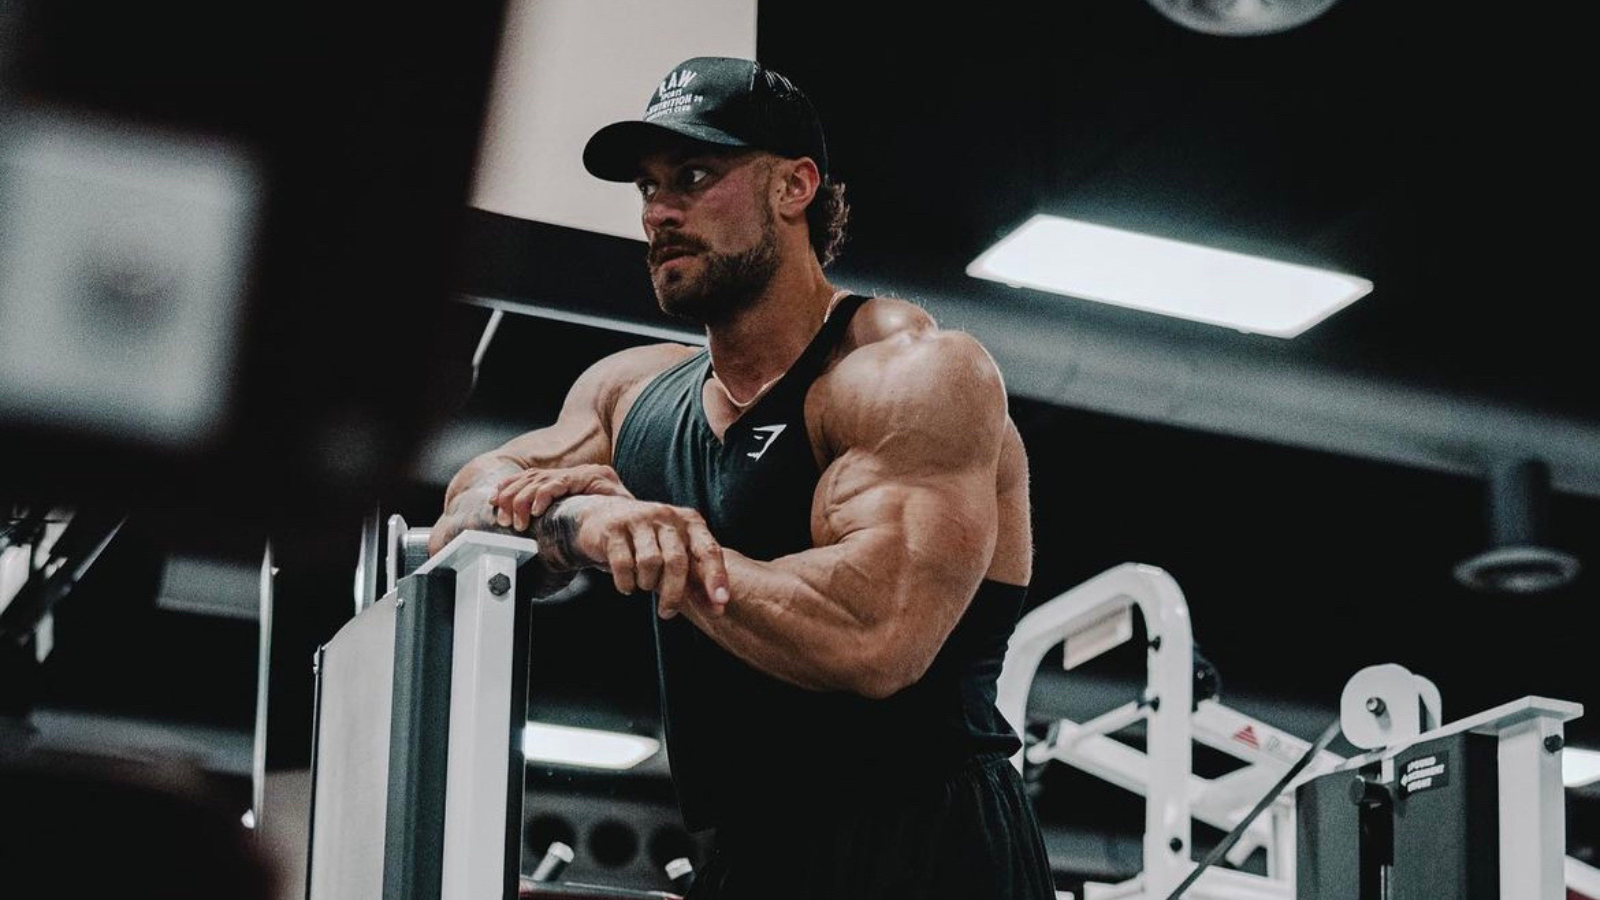 Here's How Chris Bumstead Is Training His Arms After a Biceps Tear | BarBend